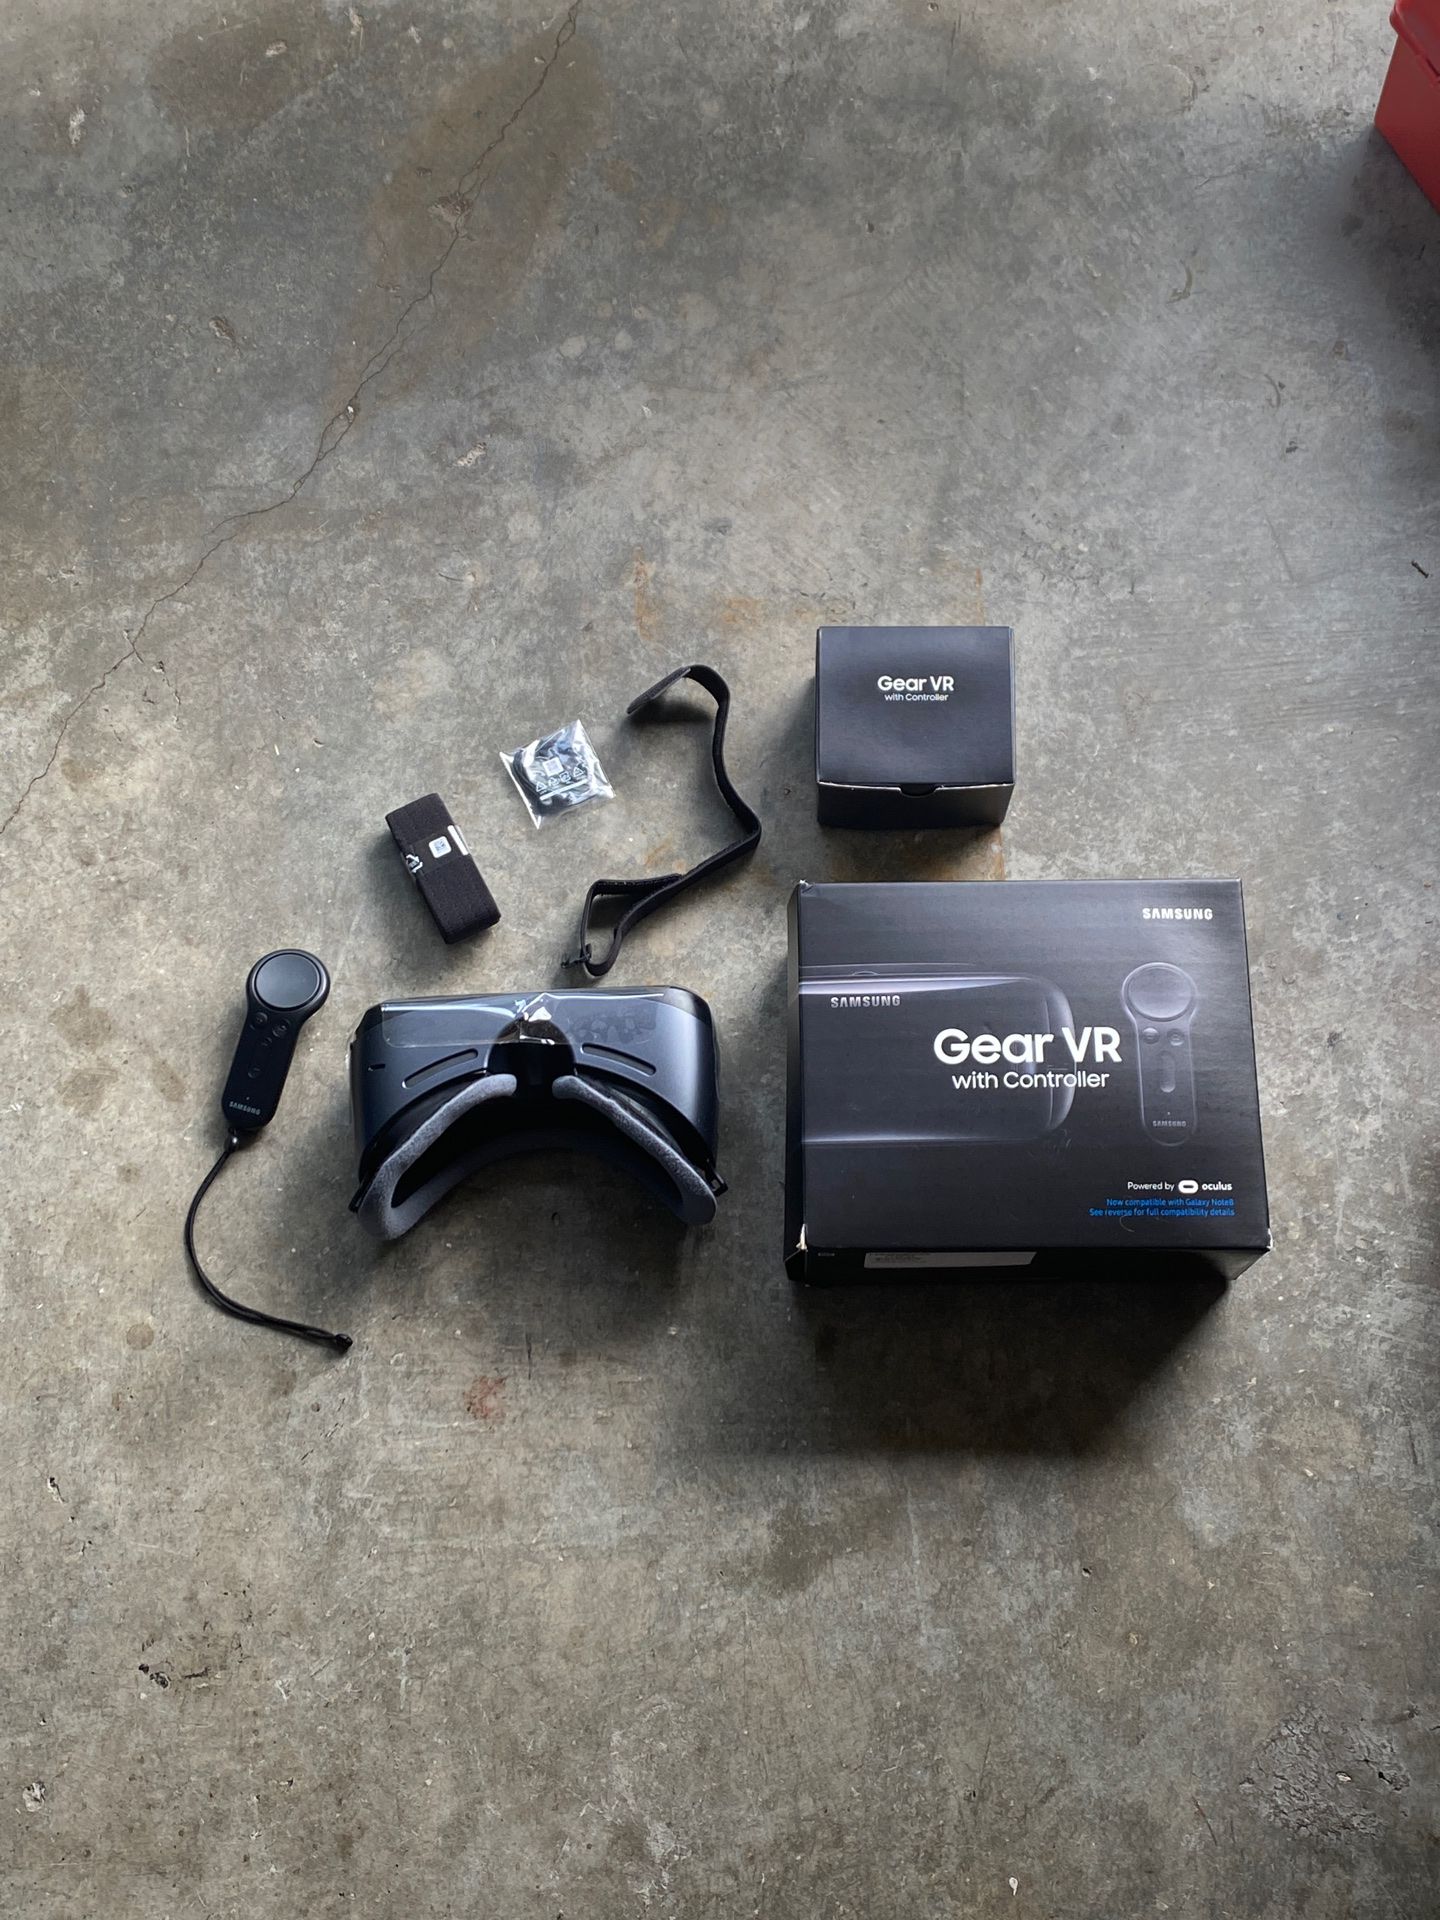 Gear Vr with controller